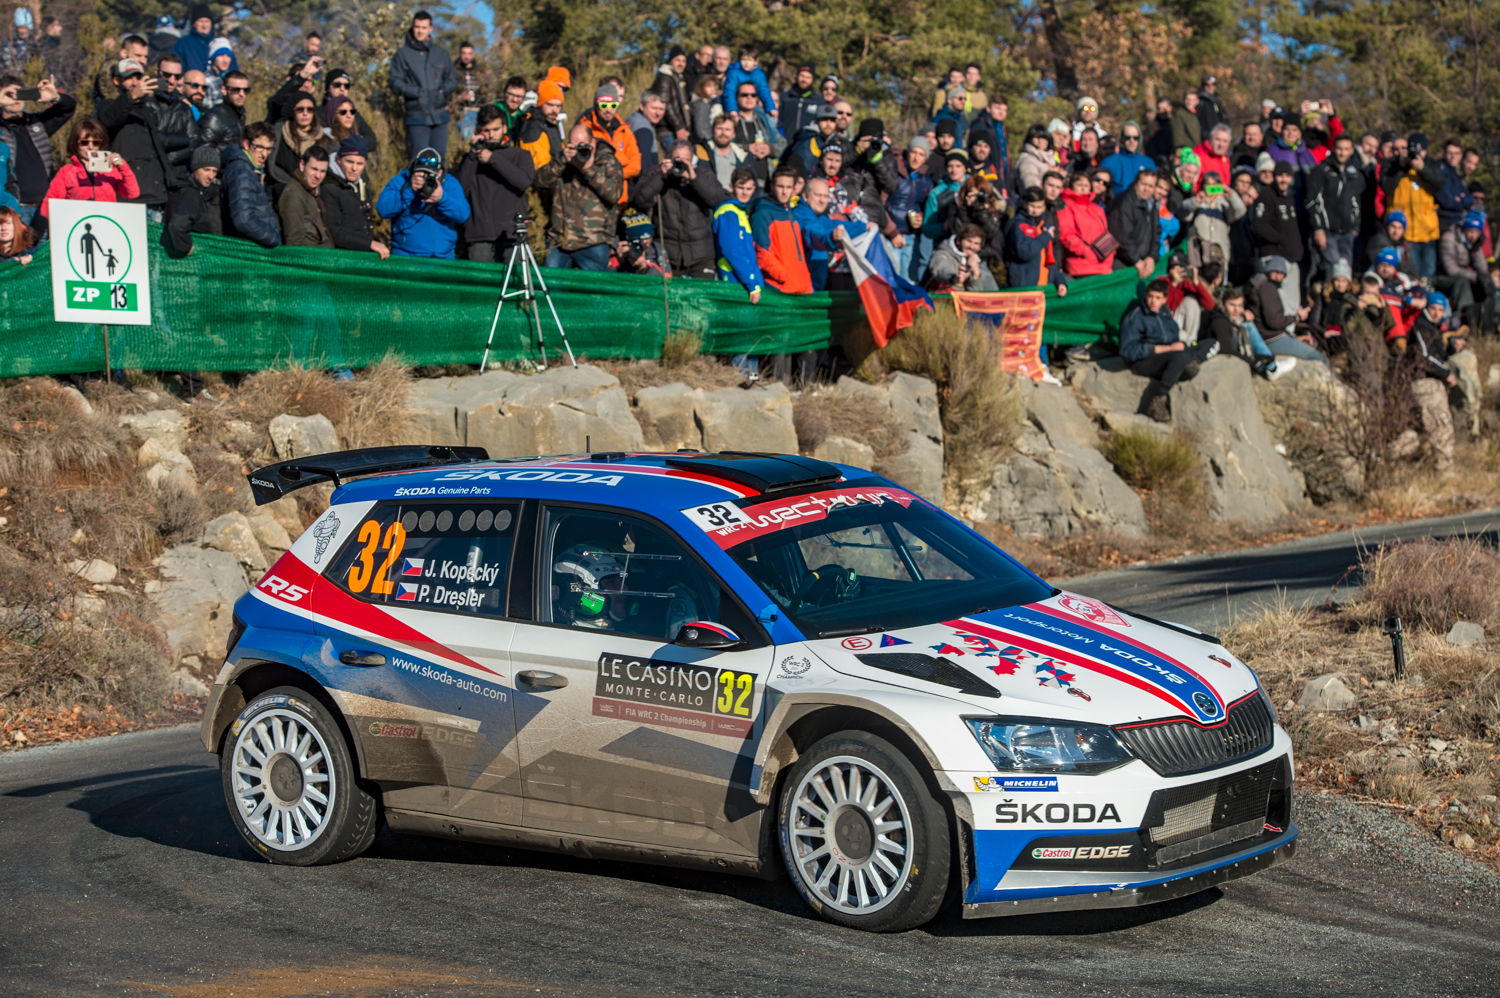 Jan Kopecký/Pavel Dresler, driving a ŠKODA FABIA R5 carrying the tricolour of the Czech flag, won WRC 2 category and RC 2 class at Rally Monte-Carlo